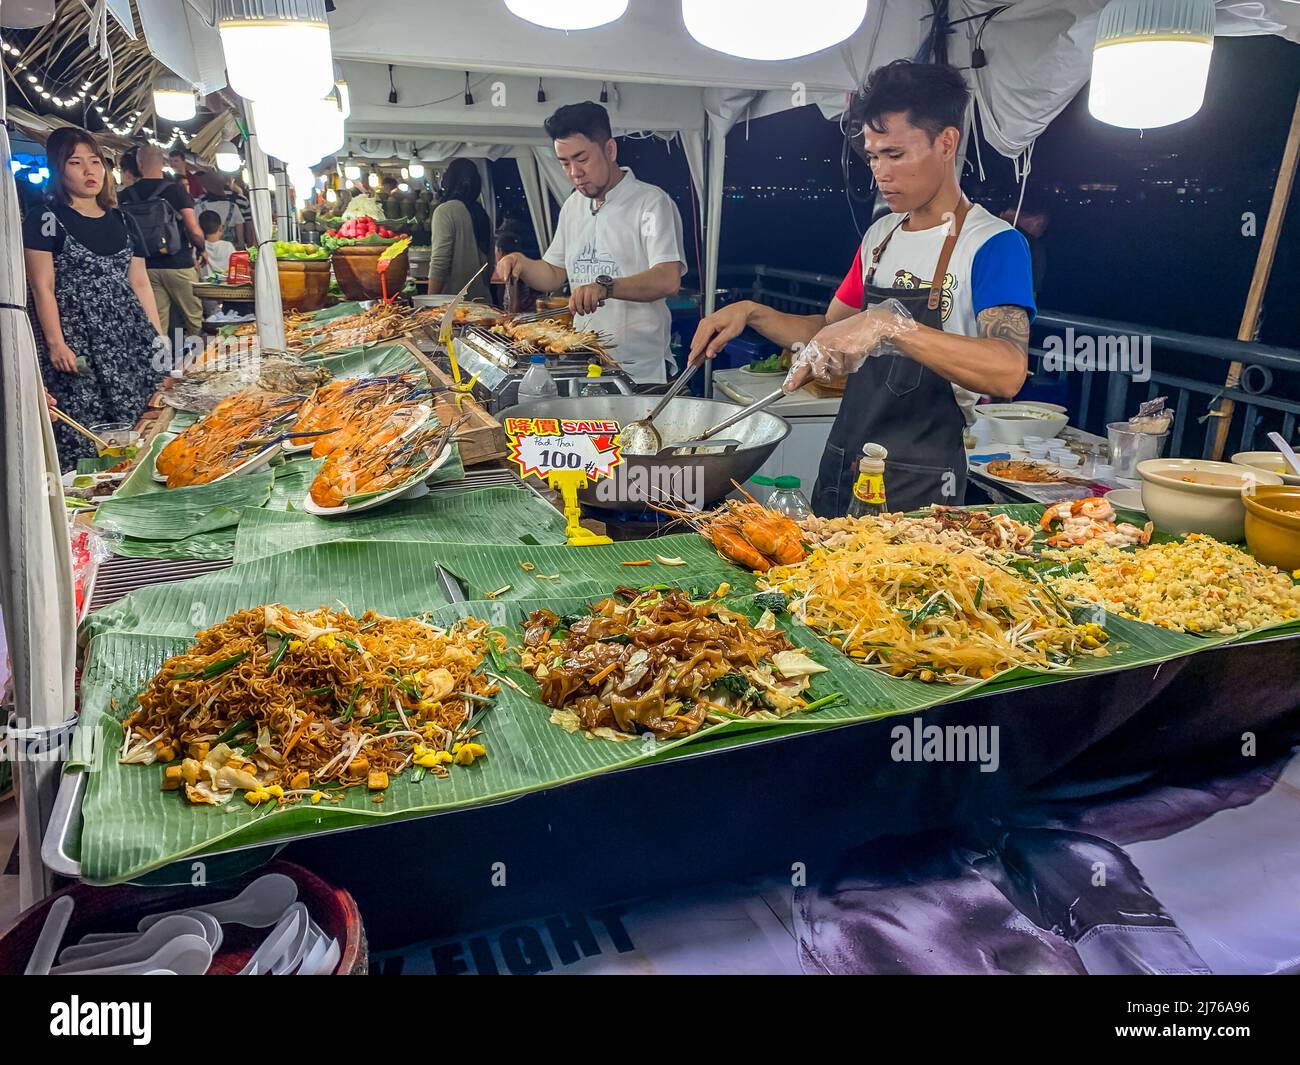 Selling Pad Thai and various typical dishes, Asiatique The Riverfront, entertainment mile, night market, Chao Praya River, Bangkok, Thailand, Asia Stock Photo